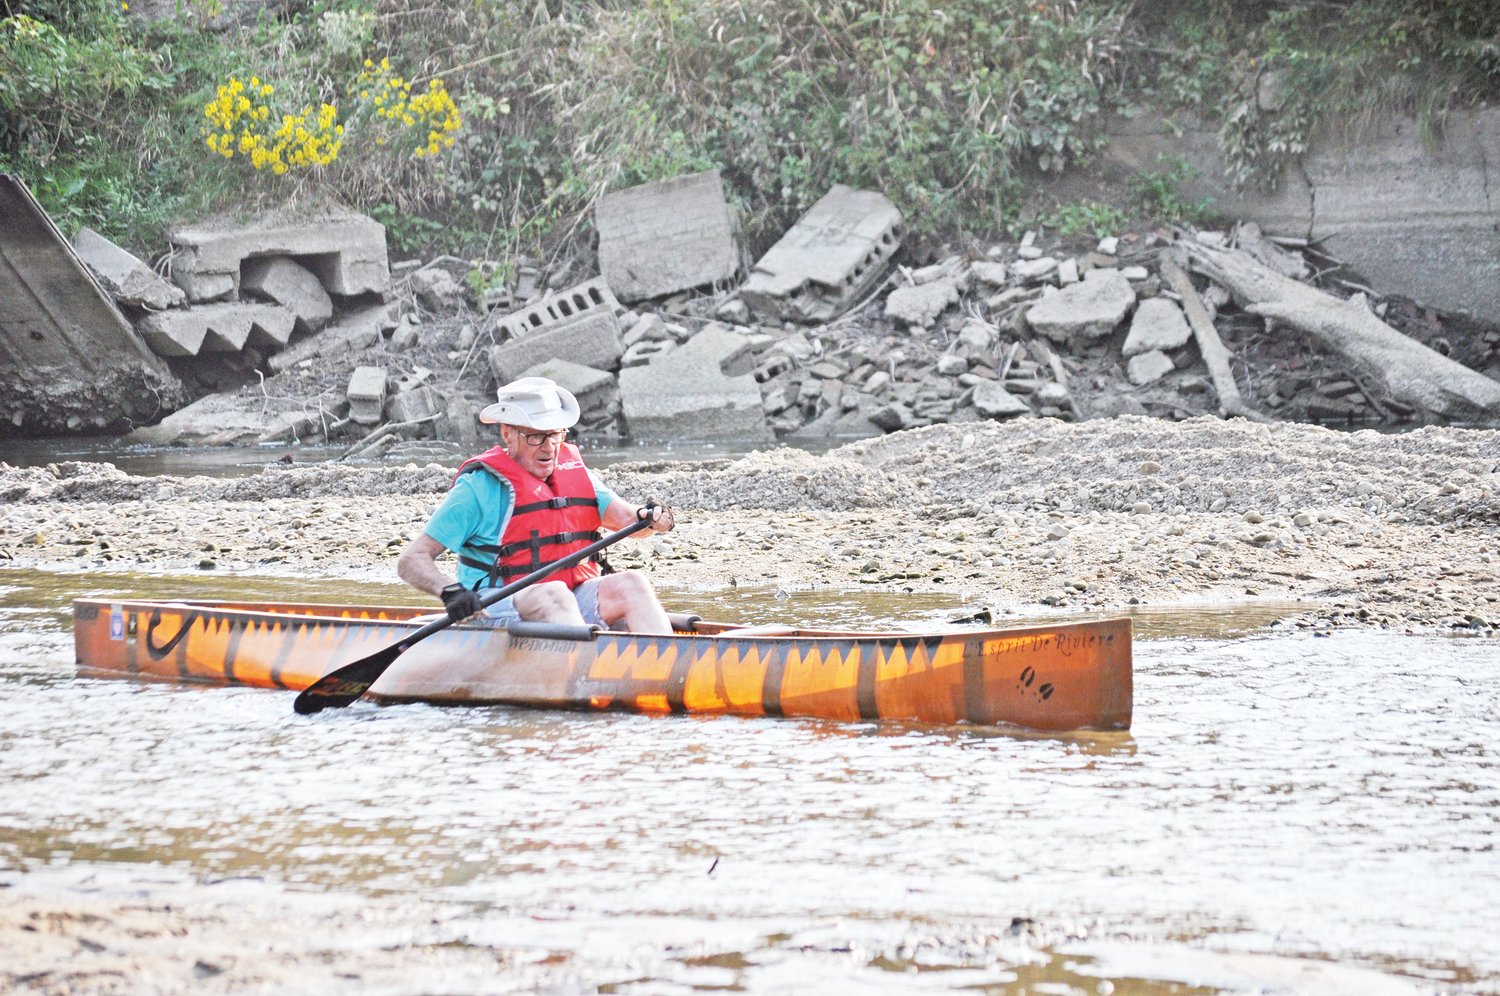 Bob Stwalley, 90, paddles through the old lowhead dam site on Sugar Creek. The dam was removed last week, and Stwalley said there was about only about 4 inches of water in that part of the creek. In a letter submitted to the Journal Review, Stwalley wrote: “I wish to thank all involved in the removal of the last dam on Sugar Creek. Mayor Todd Barton and his administration, the Friends of Sugar Creek, Dr. Jerry Sweeten and his staff and the heavy equipment operators of Walden’s. From start to finish, four days. Fantastic. I dedicate this paddle through the old dam site to three men and one woman who are no longer with us: Roger Beach, Don Bickel, Dr. Lewis Runnels and Patt Oakley. Also to Bob Demoret, my part-time paddling partner and all the USA paddlers. May this beautiful river now forever flow free.”